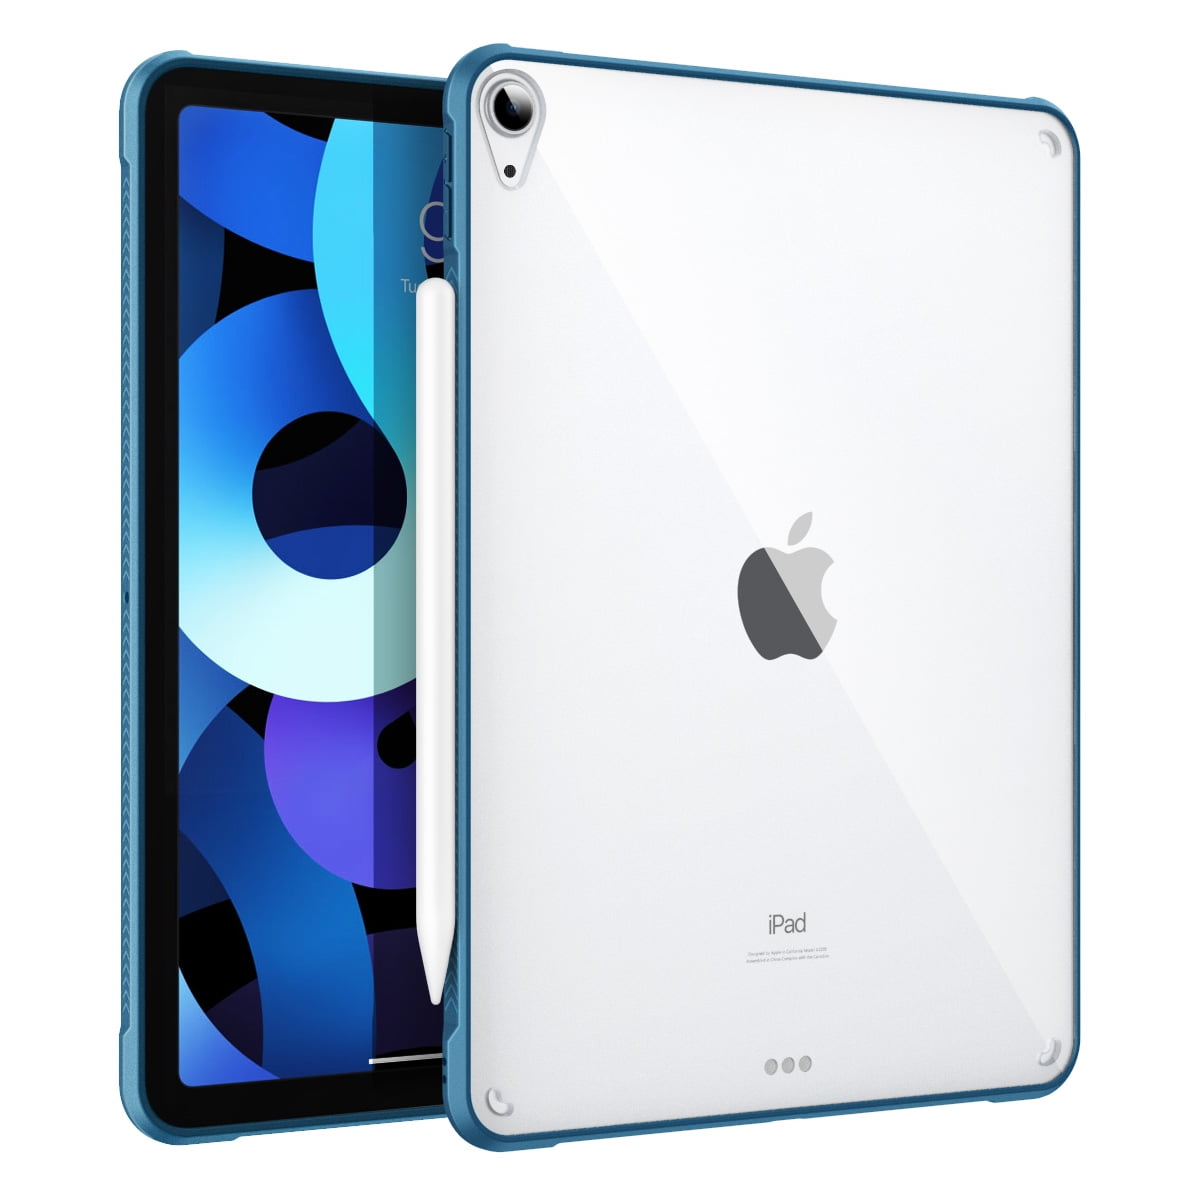 MoKo Case Fit iPad Air 4th Generation 2020 New iPad 10.9 2020 Smart Shell Trifold Cover with Built-in Pencil Holder Sky Blue Translucent TPU Back Corner/Bumper Protector Case with Auto Wake/Sleep 